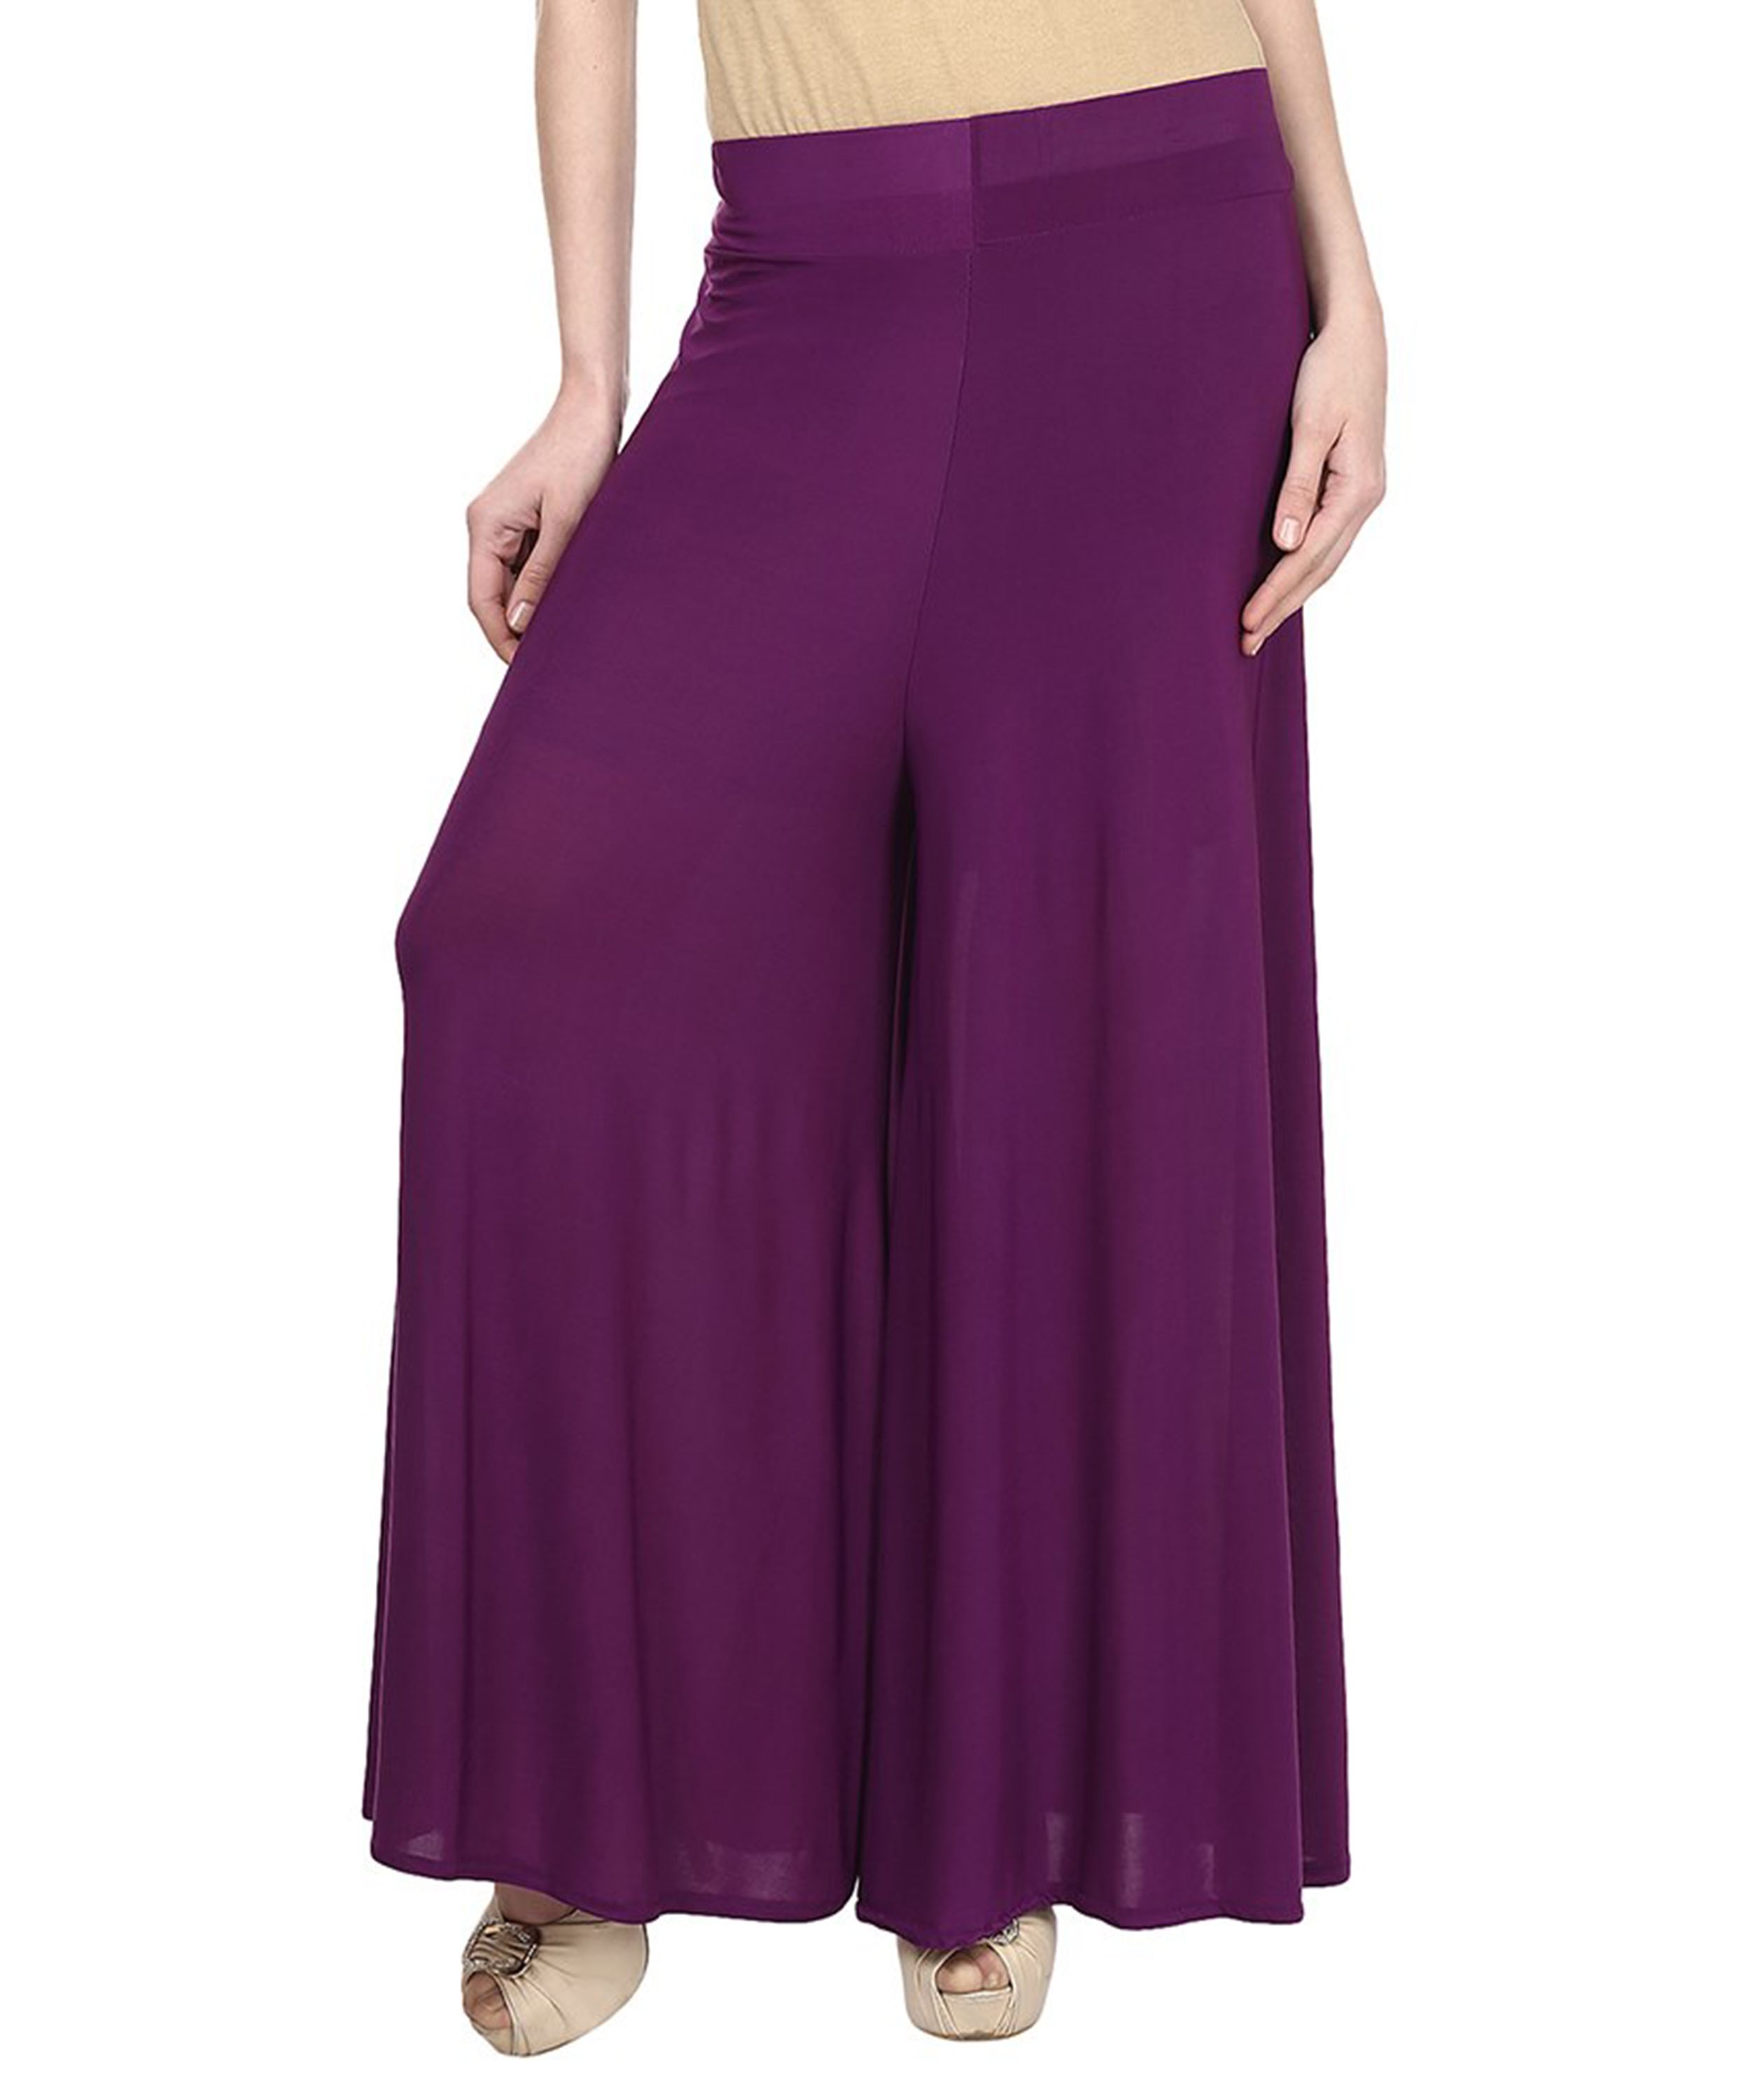 Buy Sritika Satin Palazzos Online at Best Prices in India - Snapdeal